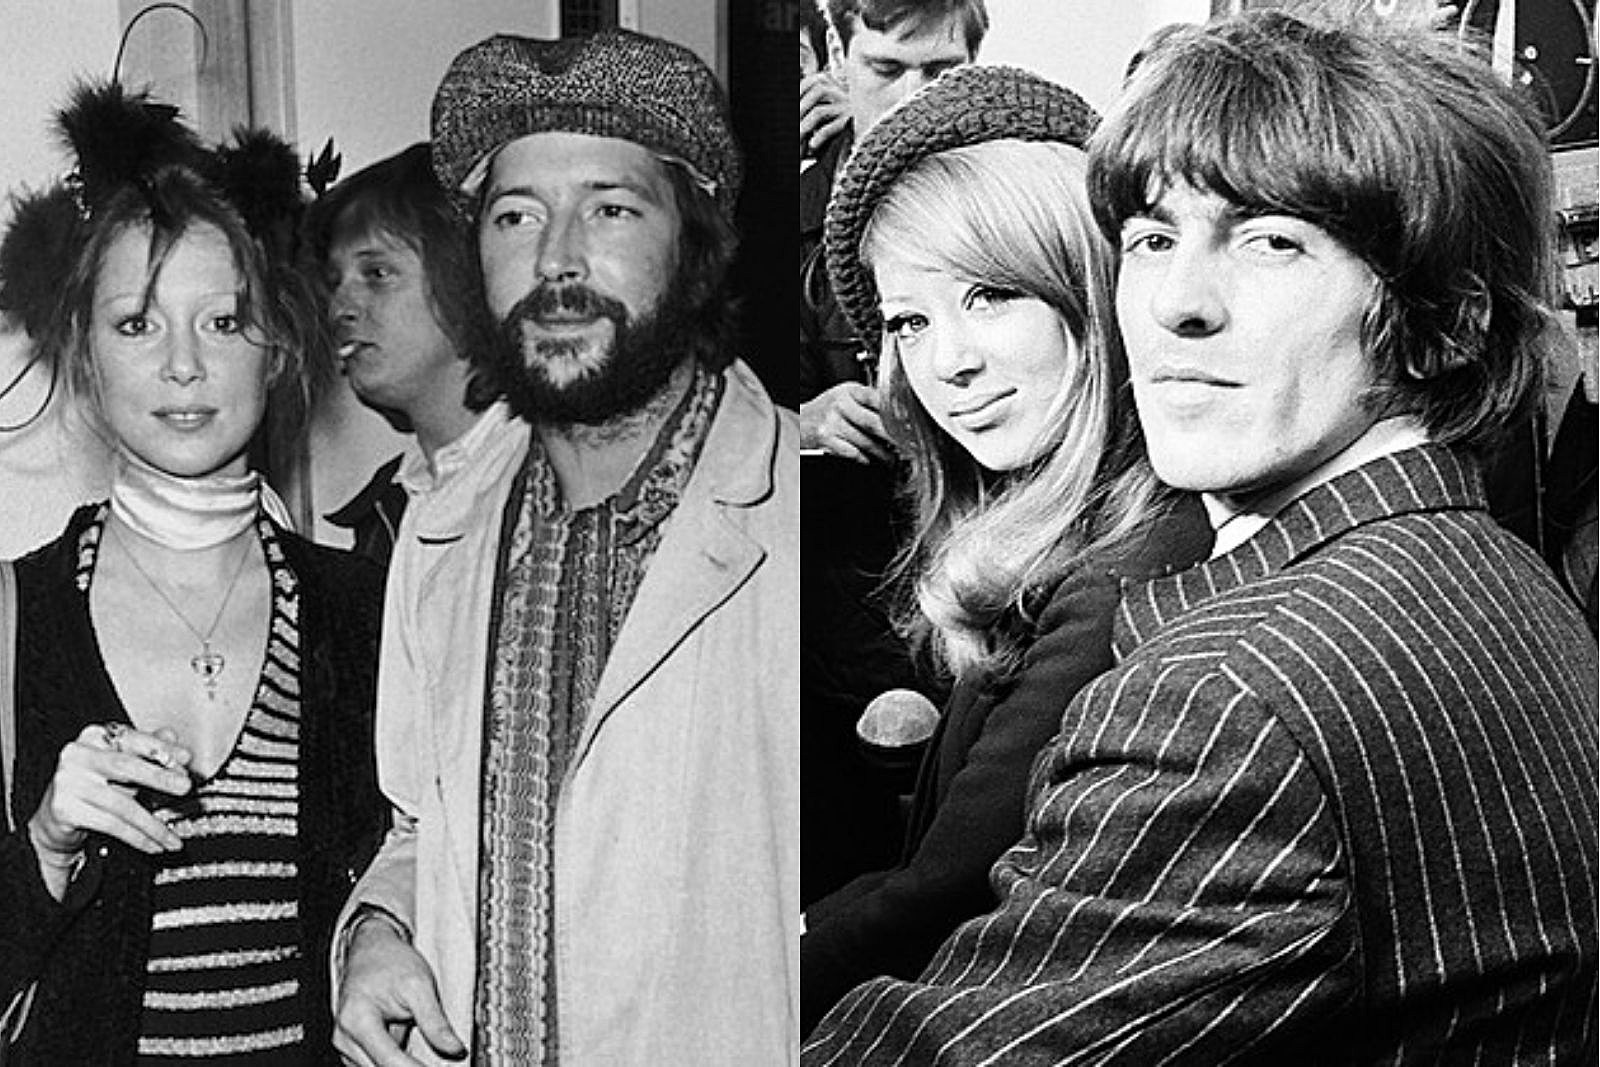 Meet Pattie Boyd, the Muse Who Inspired Rock's Best Love Songs